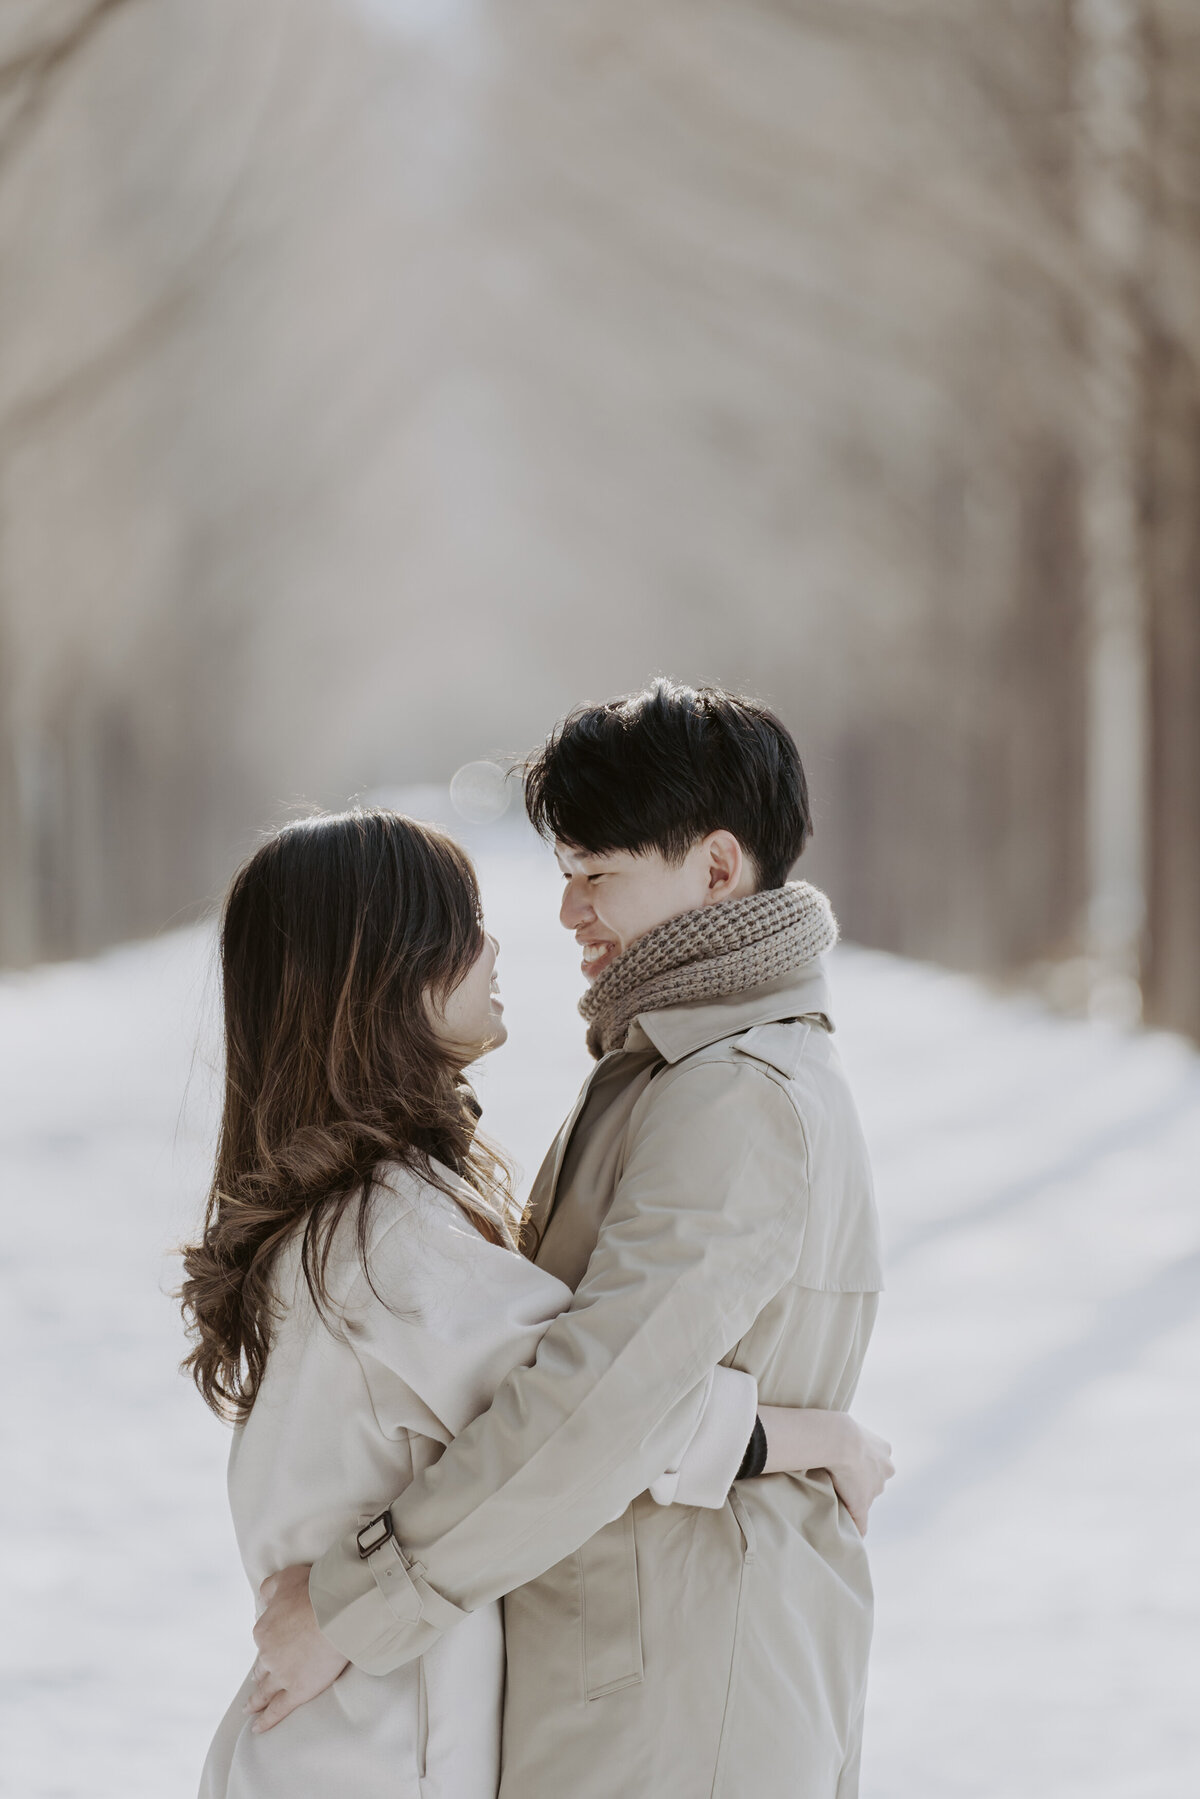 the couple hugging while staring at each other in a winter snow in damyang south korea